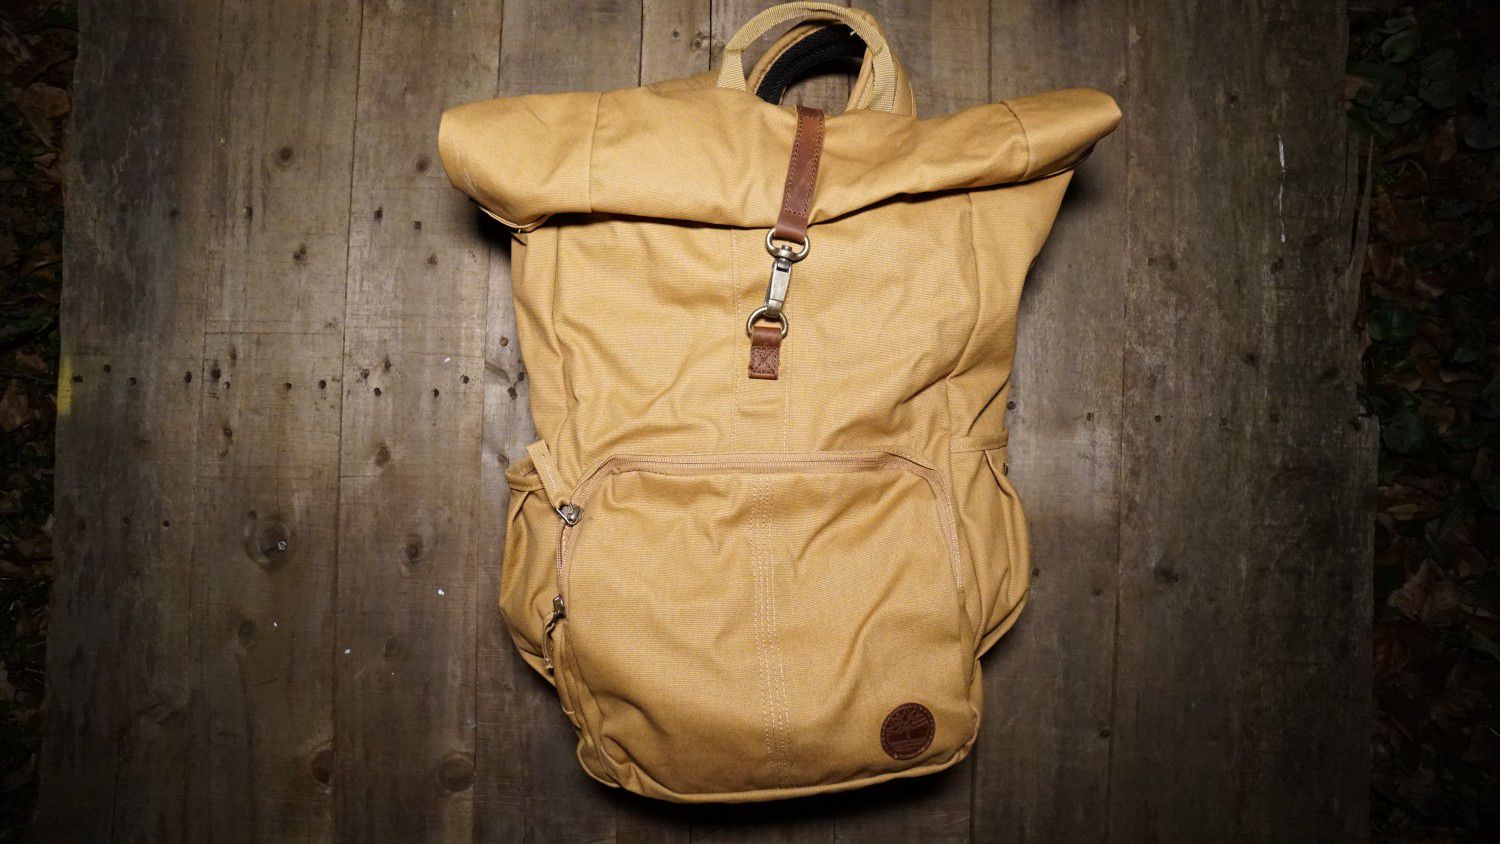 Timberland Canvas & Leather Backpack - NEW